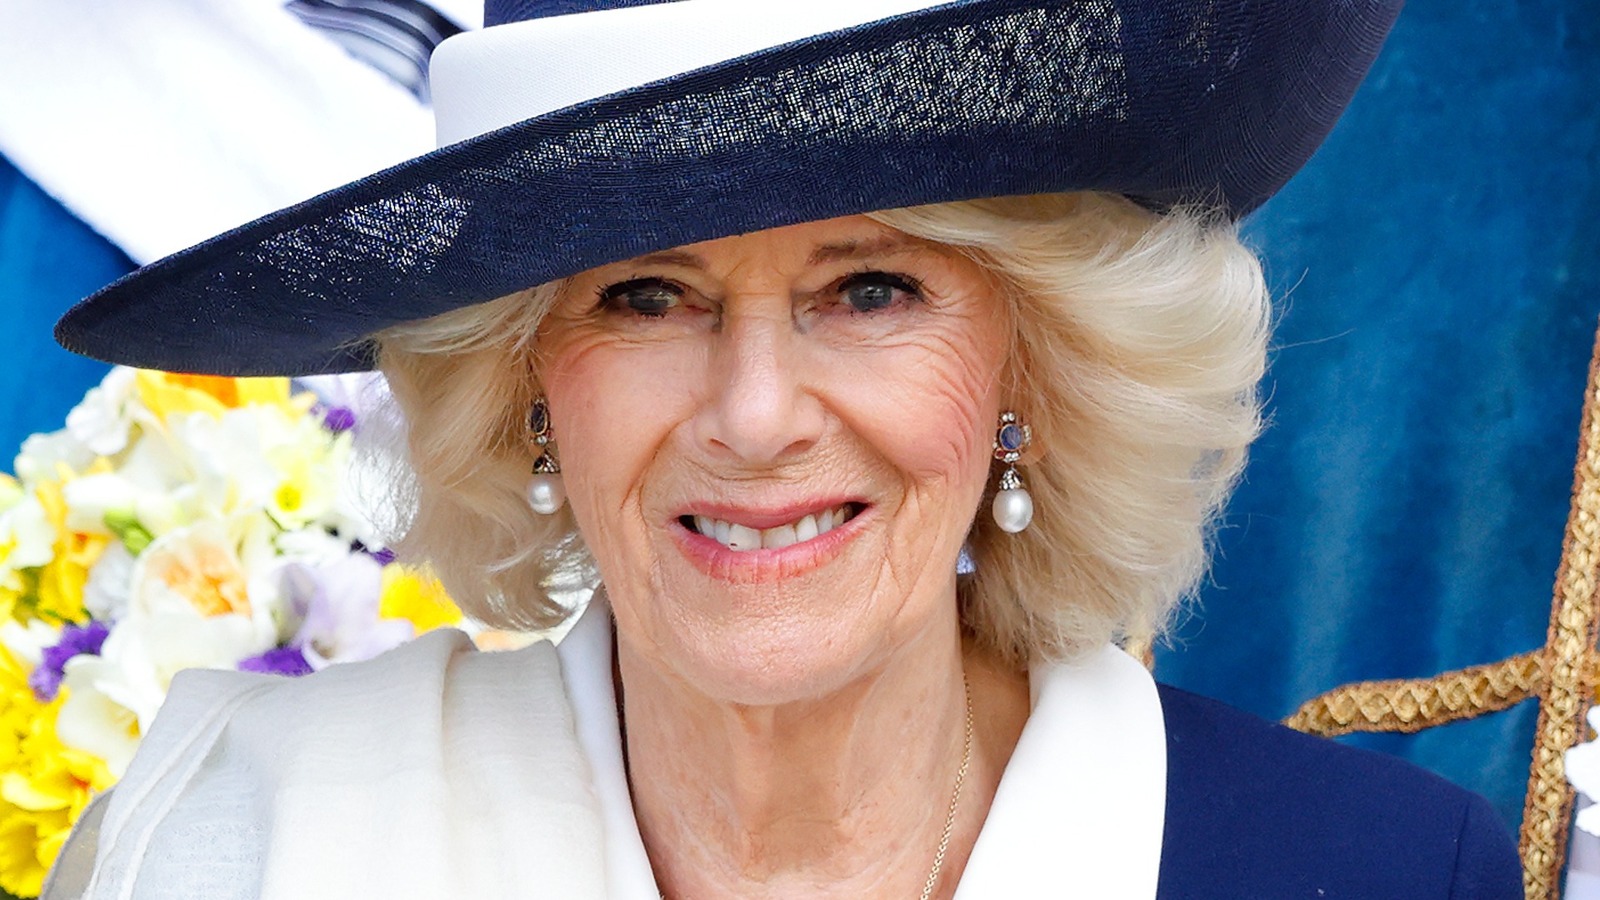 The Duchess of Cornwall looks FABULOUS in Fulham - & her shoes are so chic